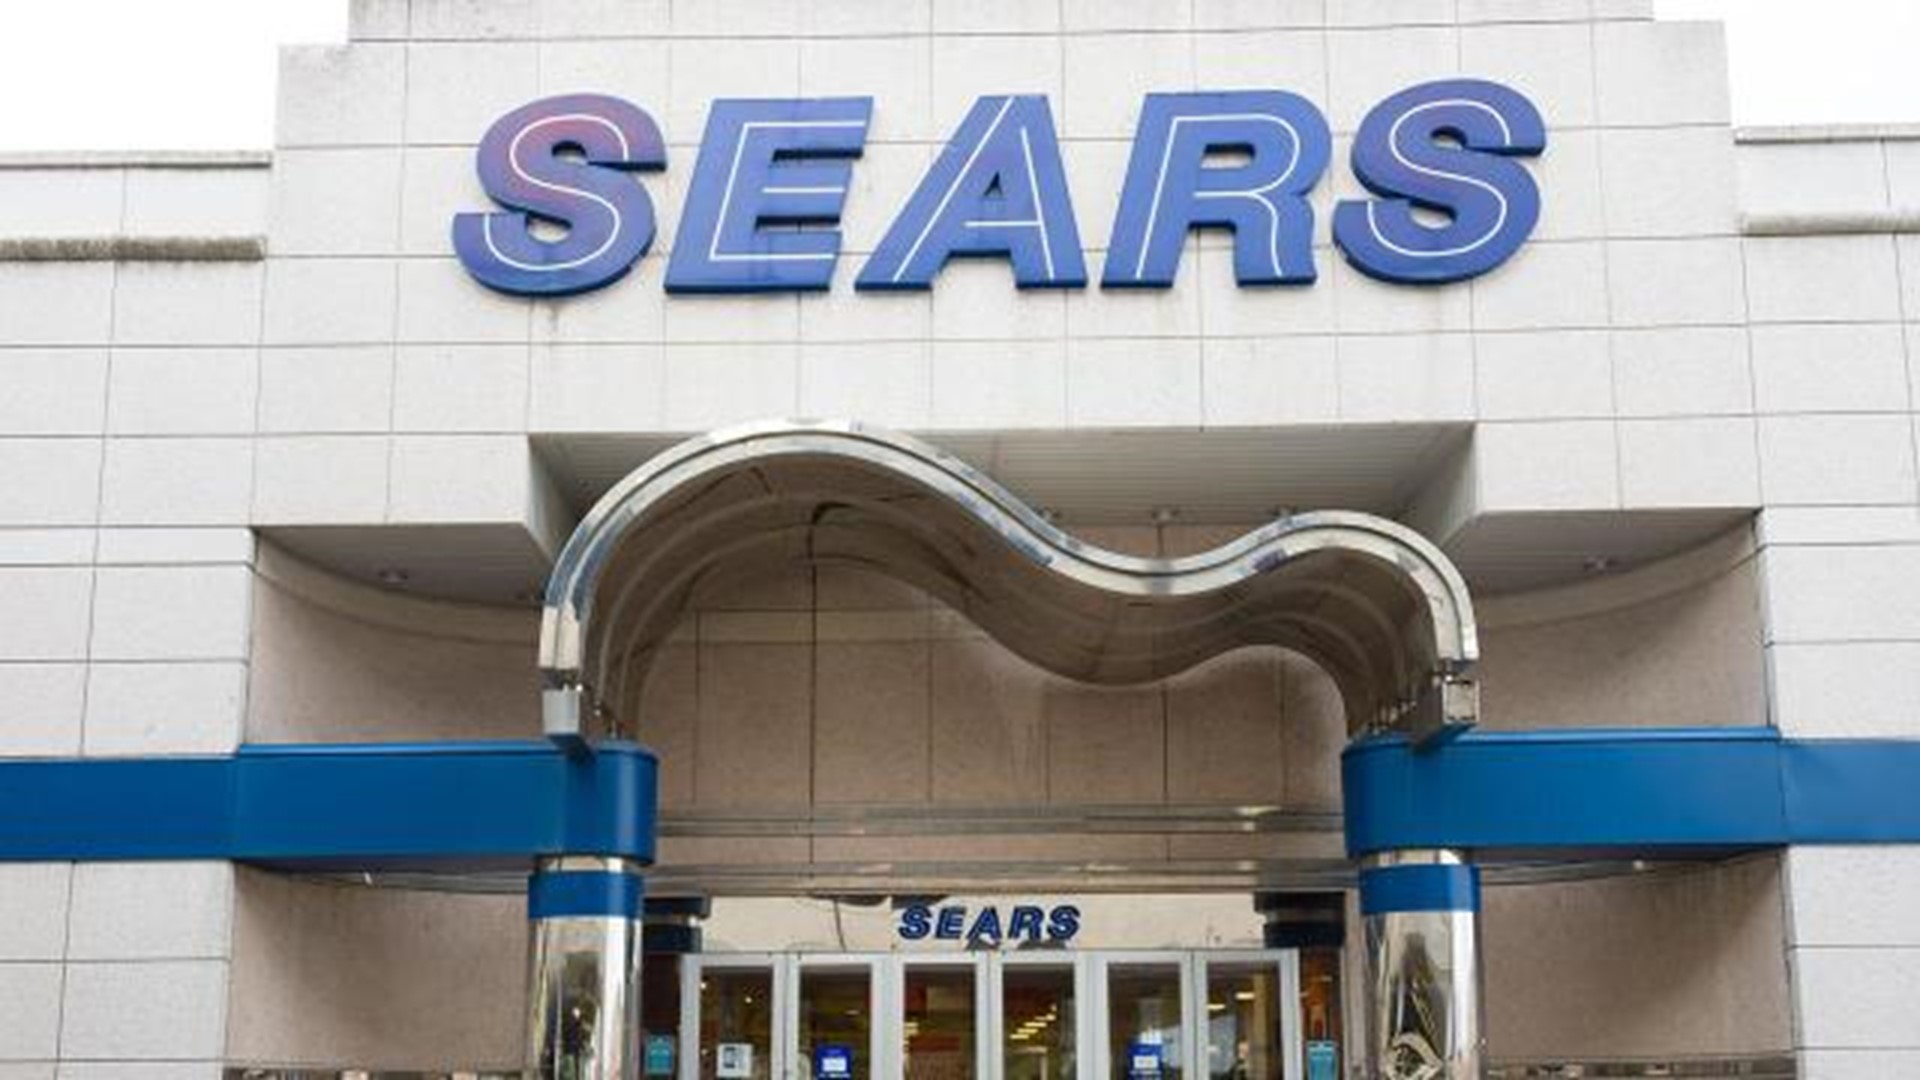 Sears expands tire services deal with Amazon | 0